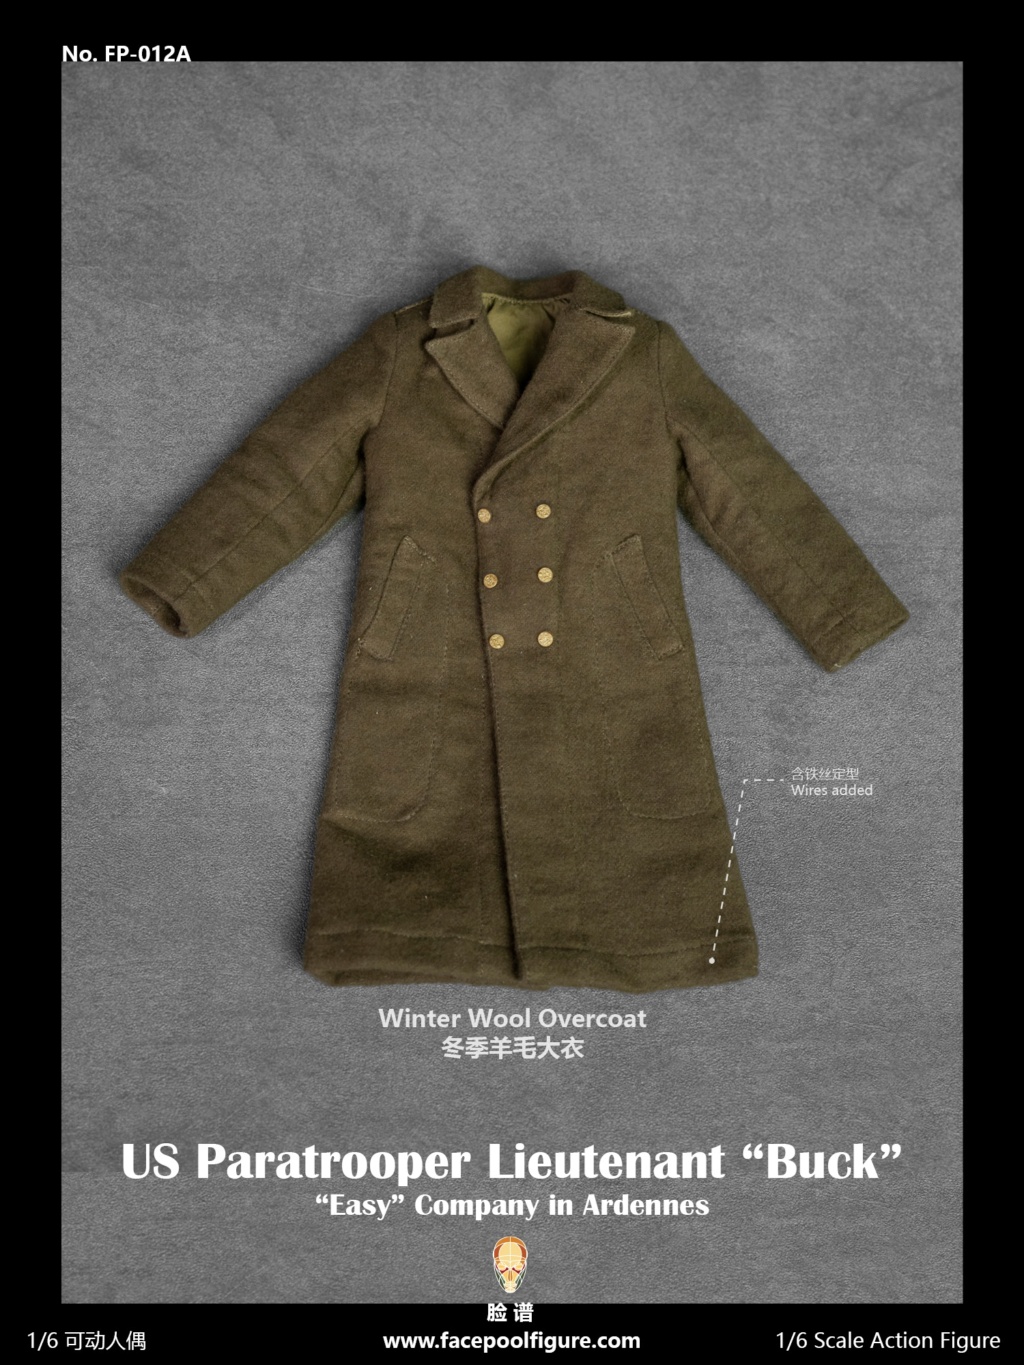 NEW PRODUCT: Facepool: 1/6 Scale US Paratrooper Lieutenant “Buck” (FP012A & B) (2 versions) 10142910